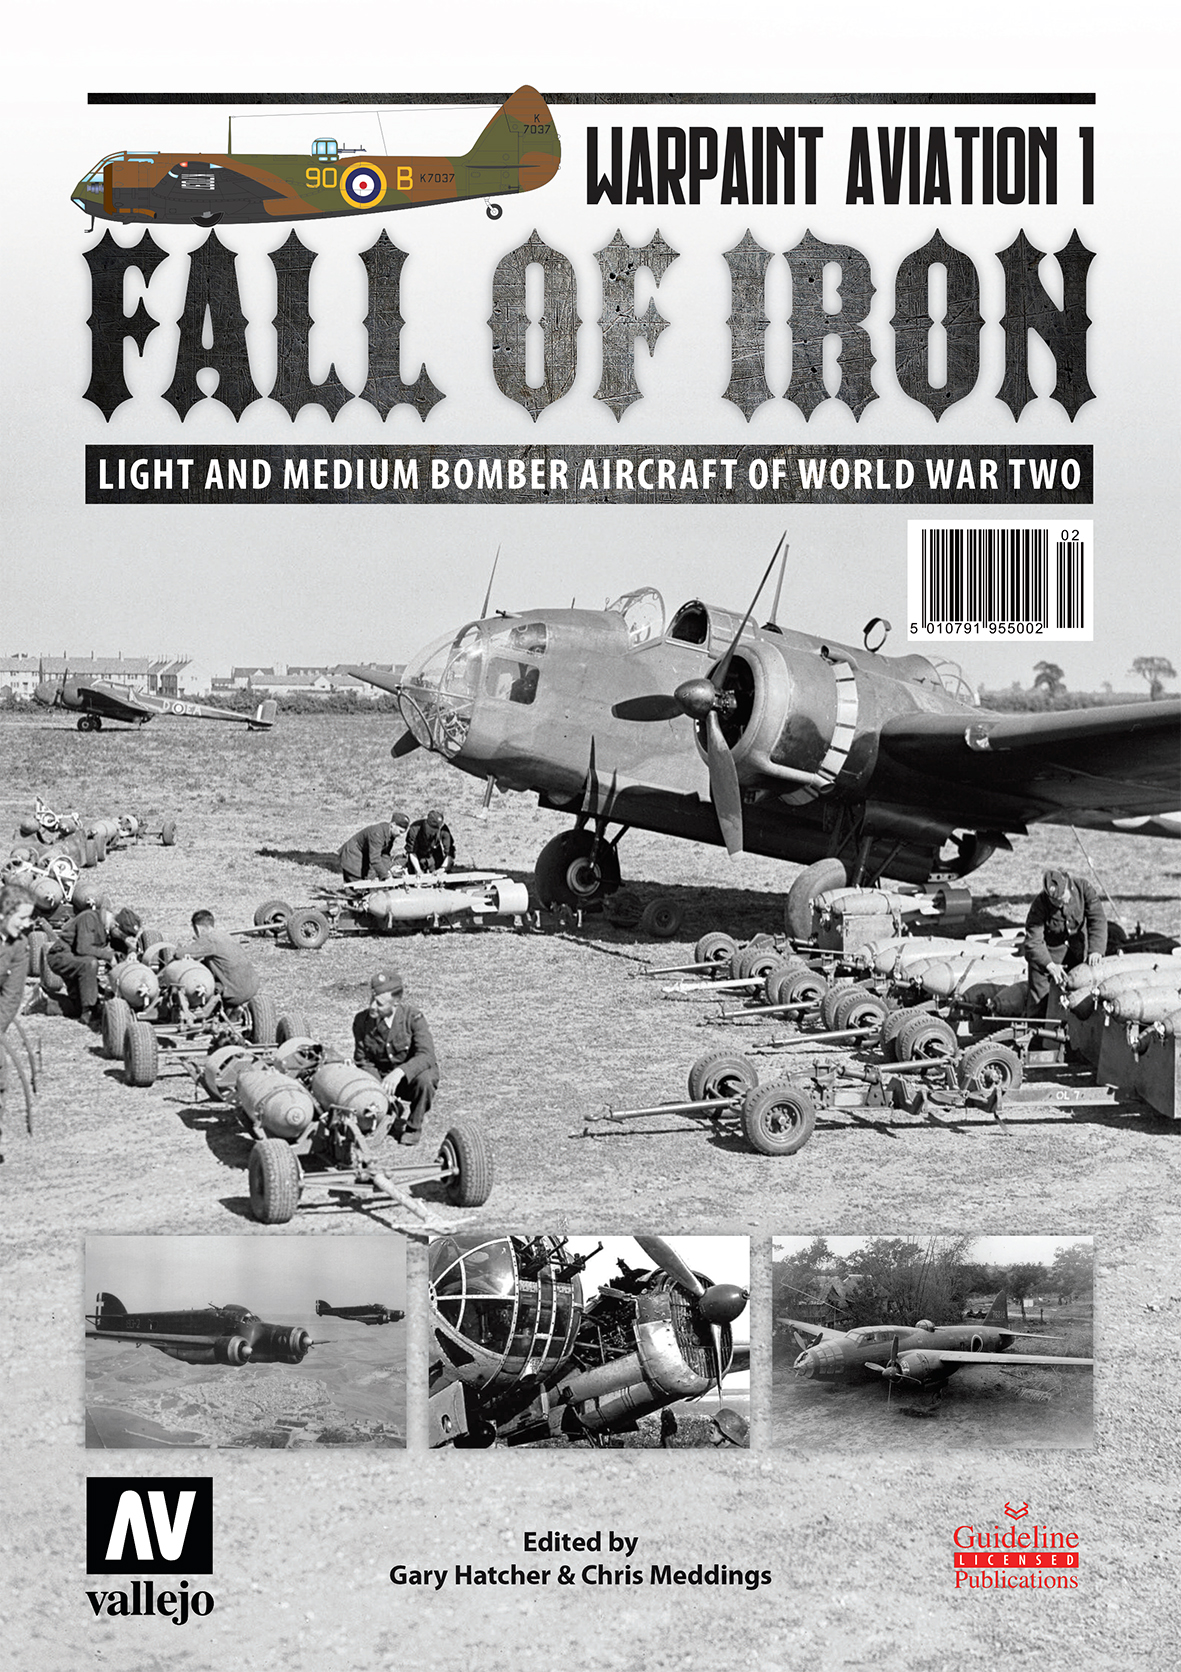 Guideline Publications Fall of Iron Light and Medium bomber aircraft of World War 2 